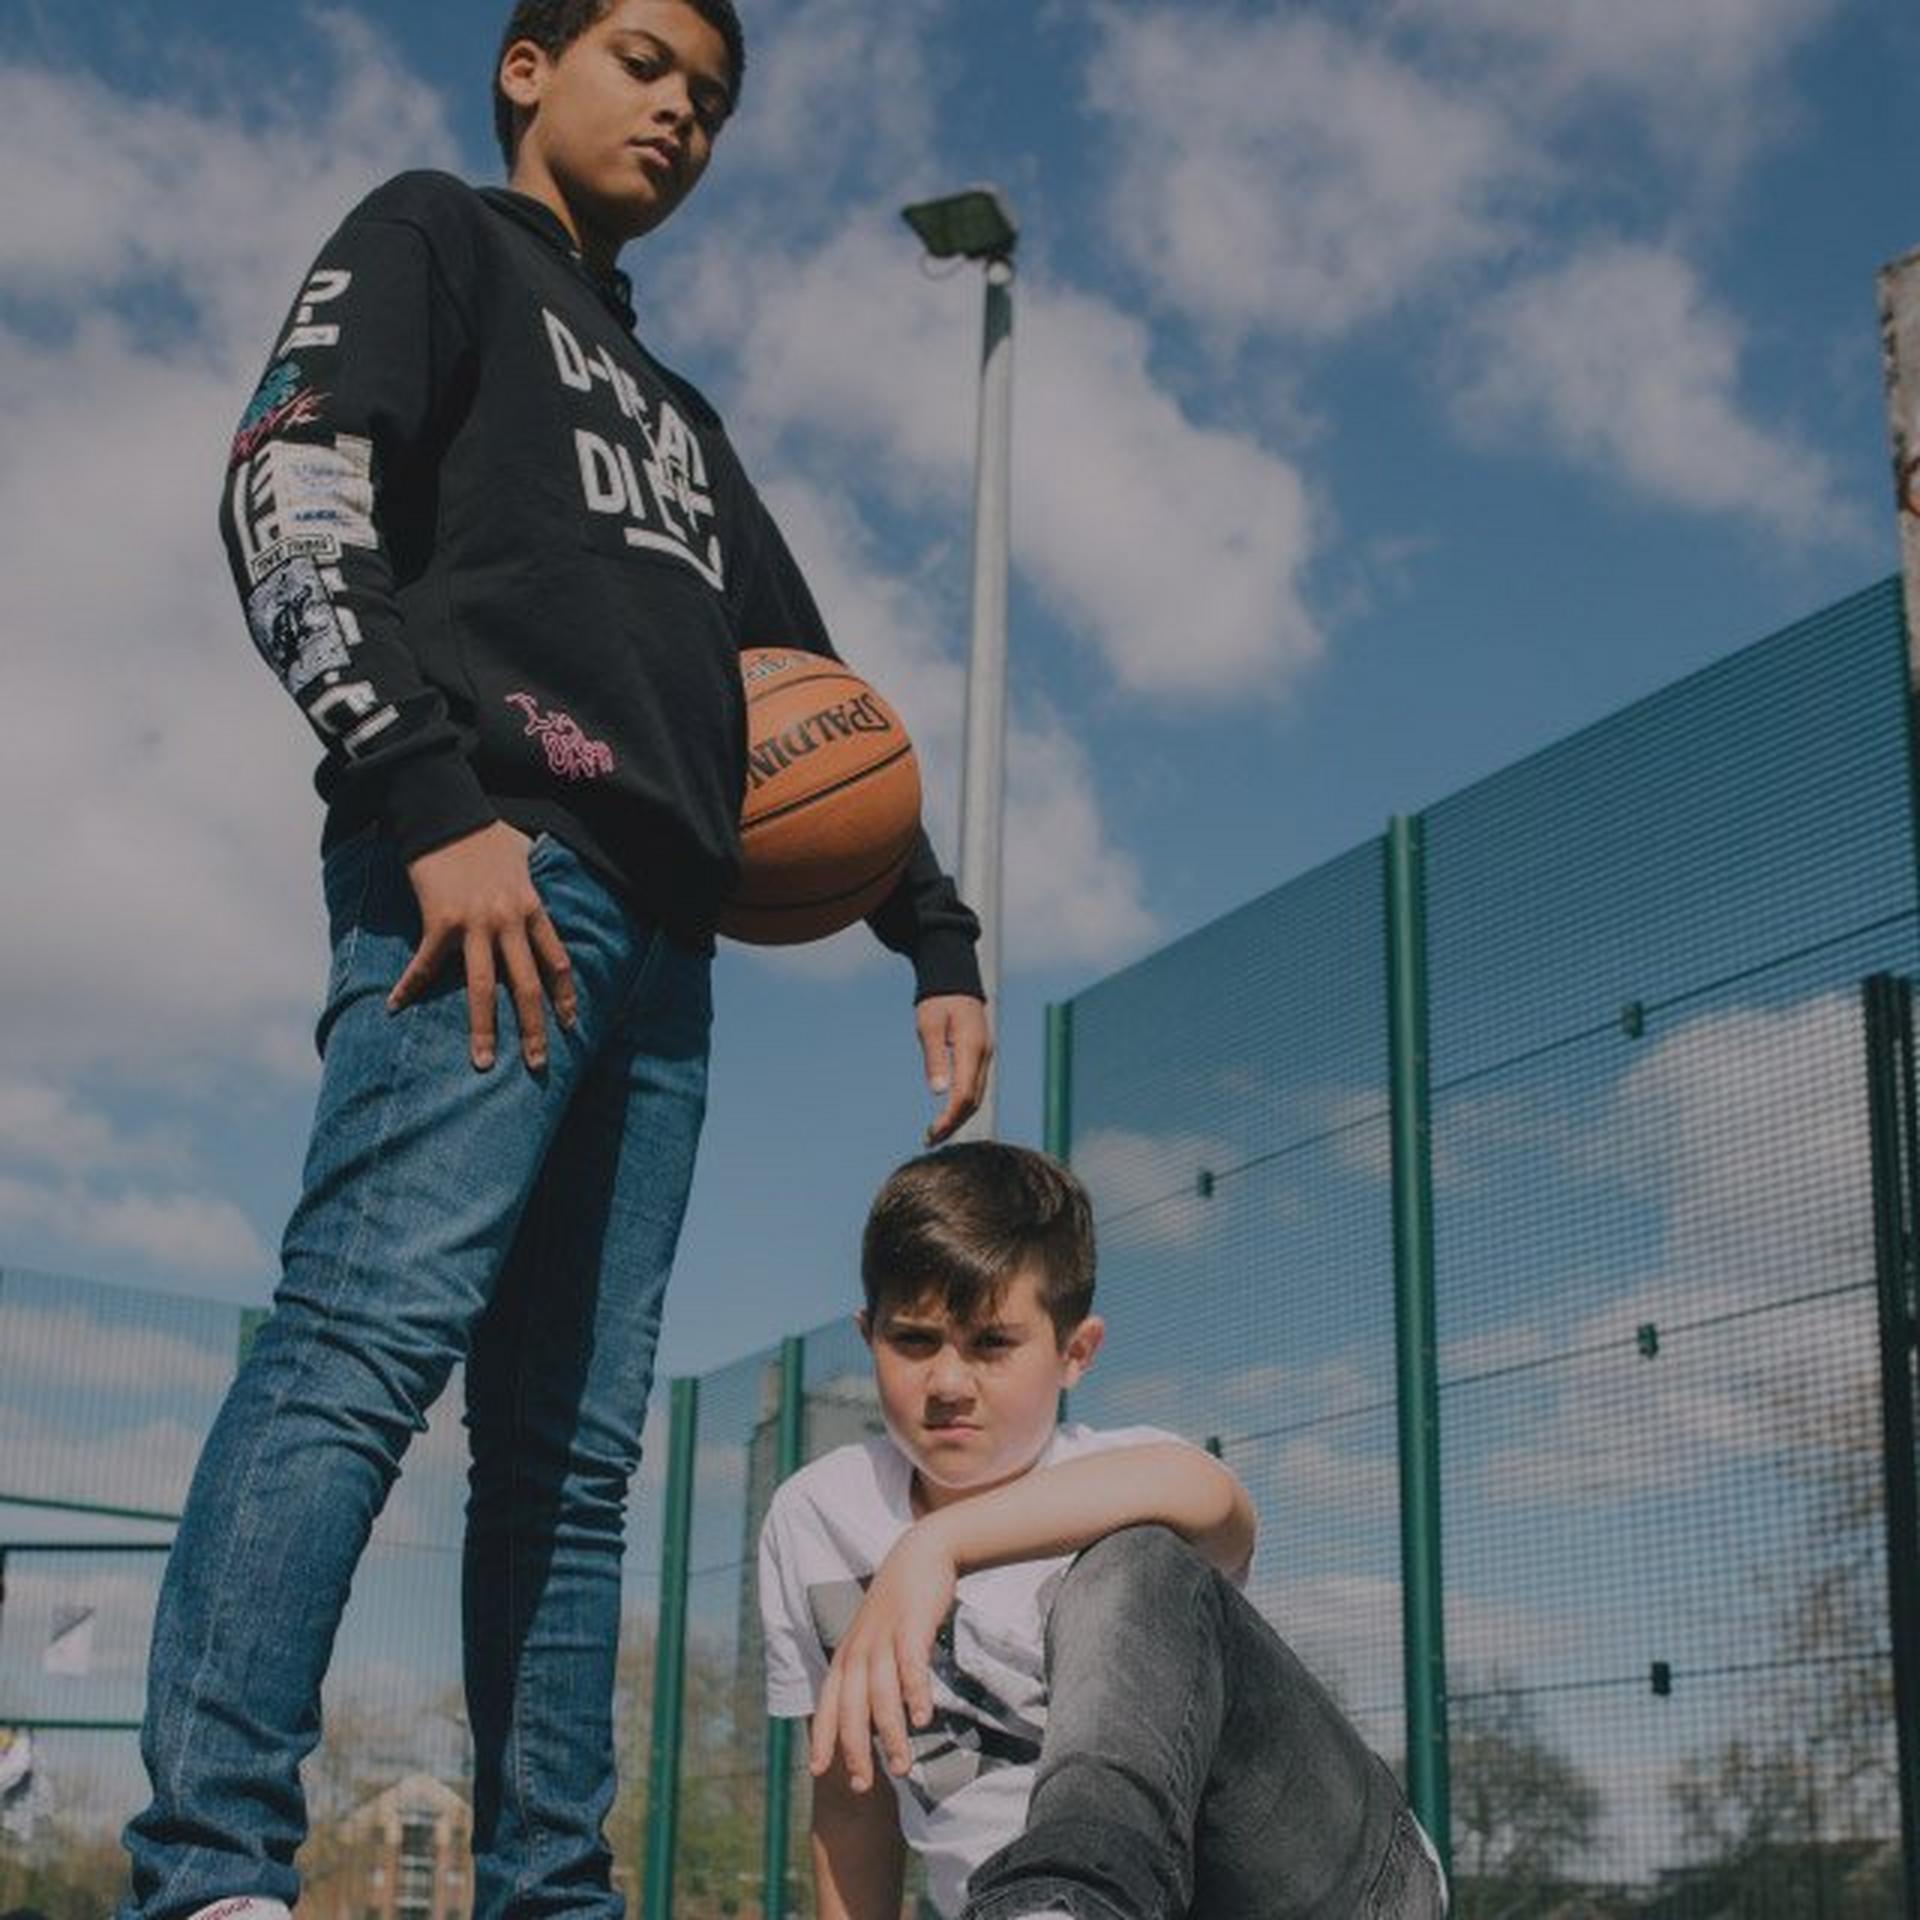 Kids posing with a basketball in Reebok clothes